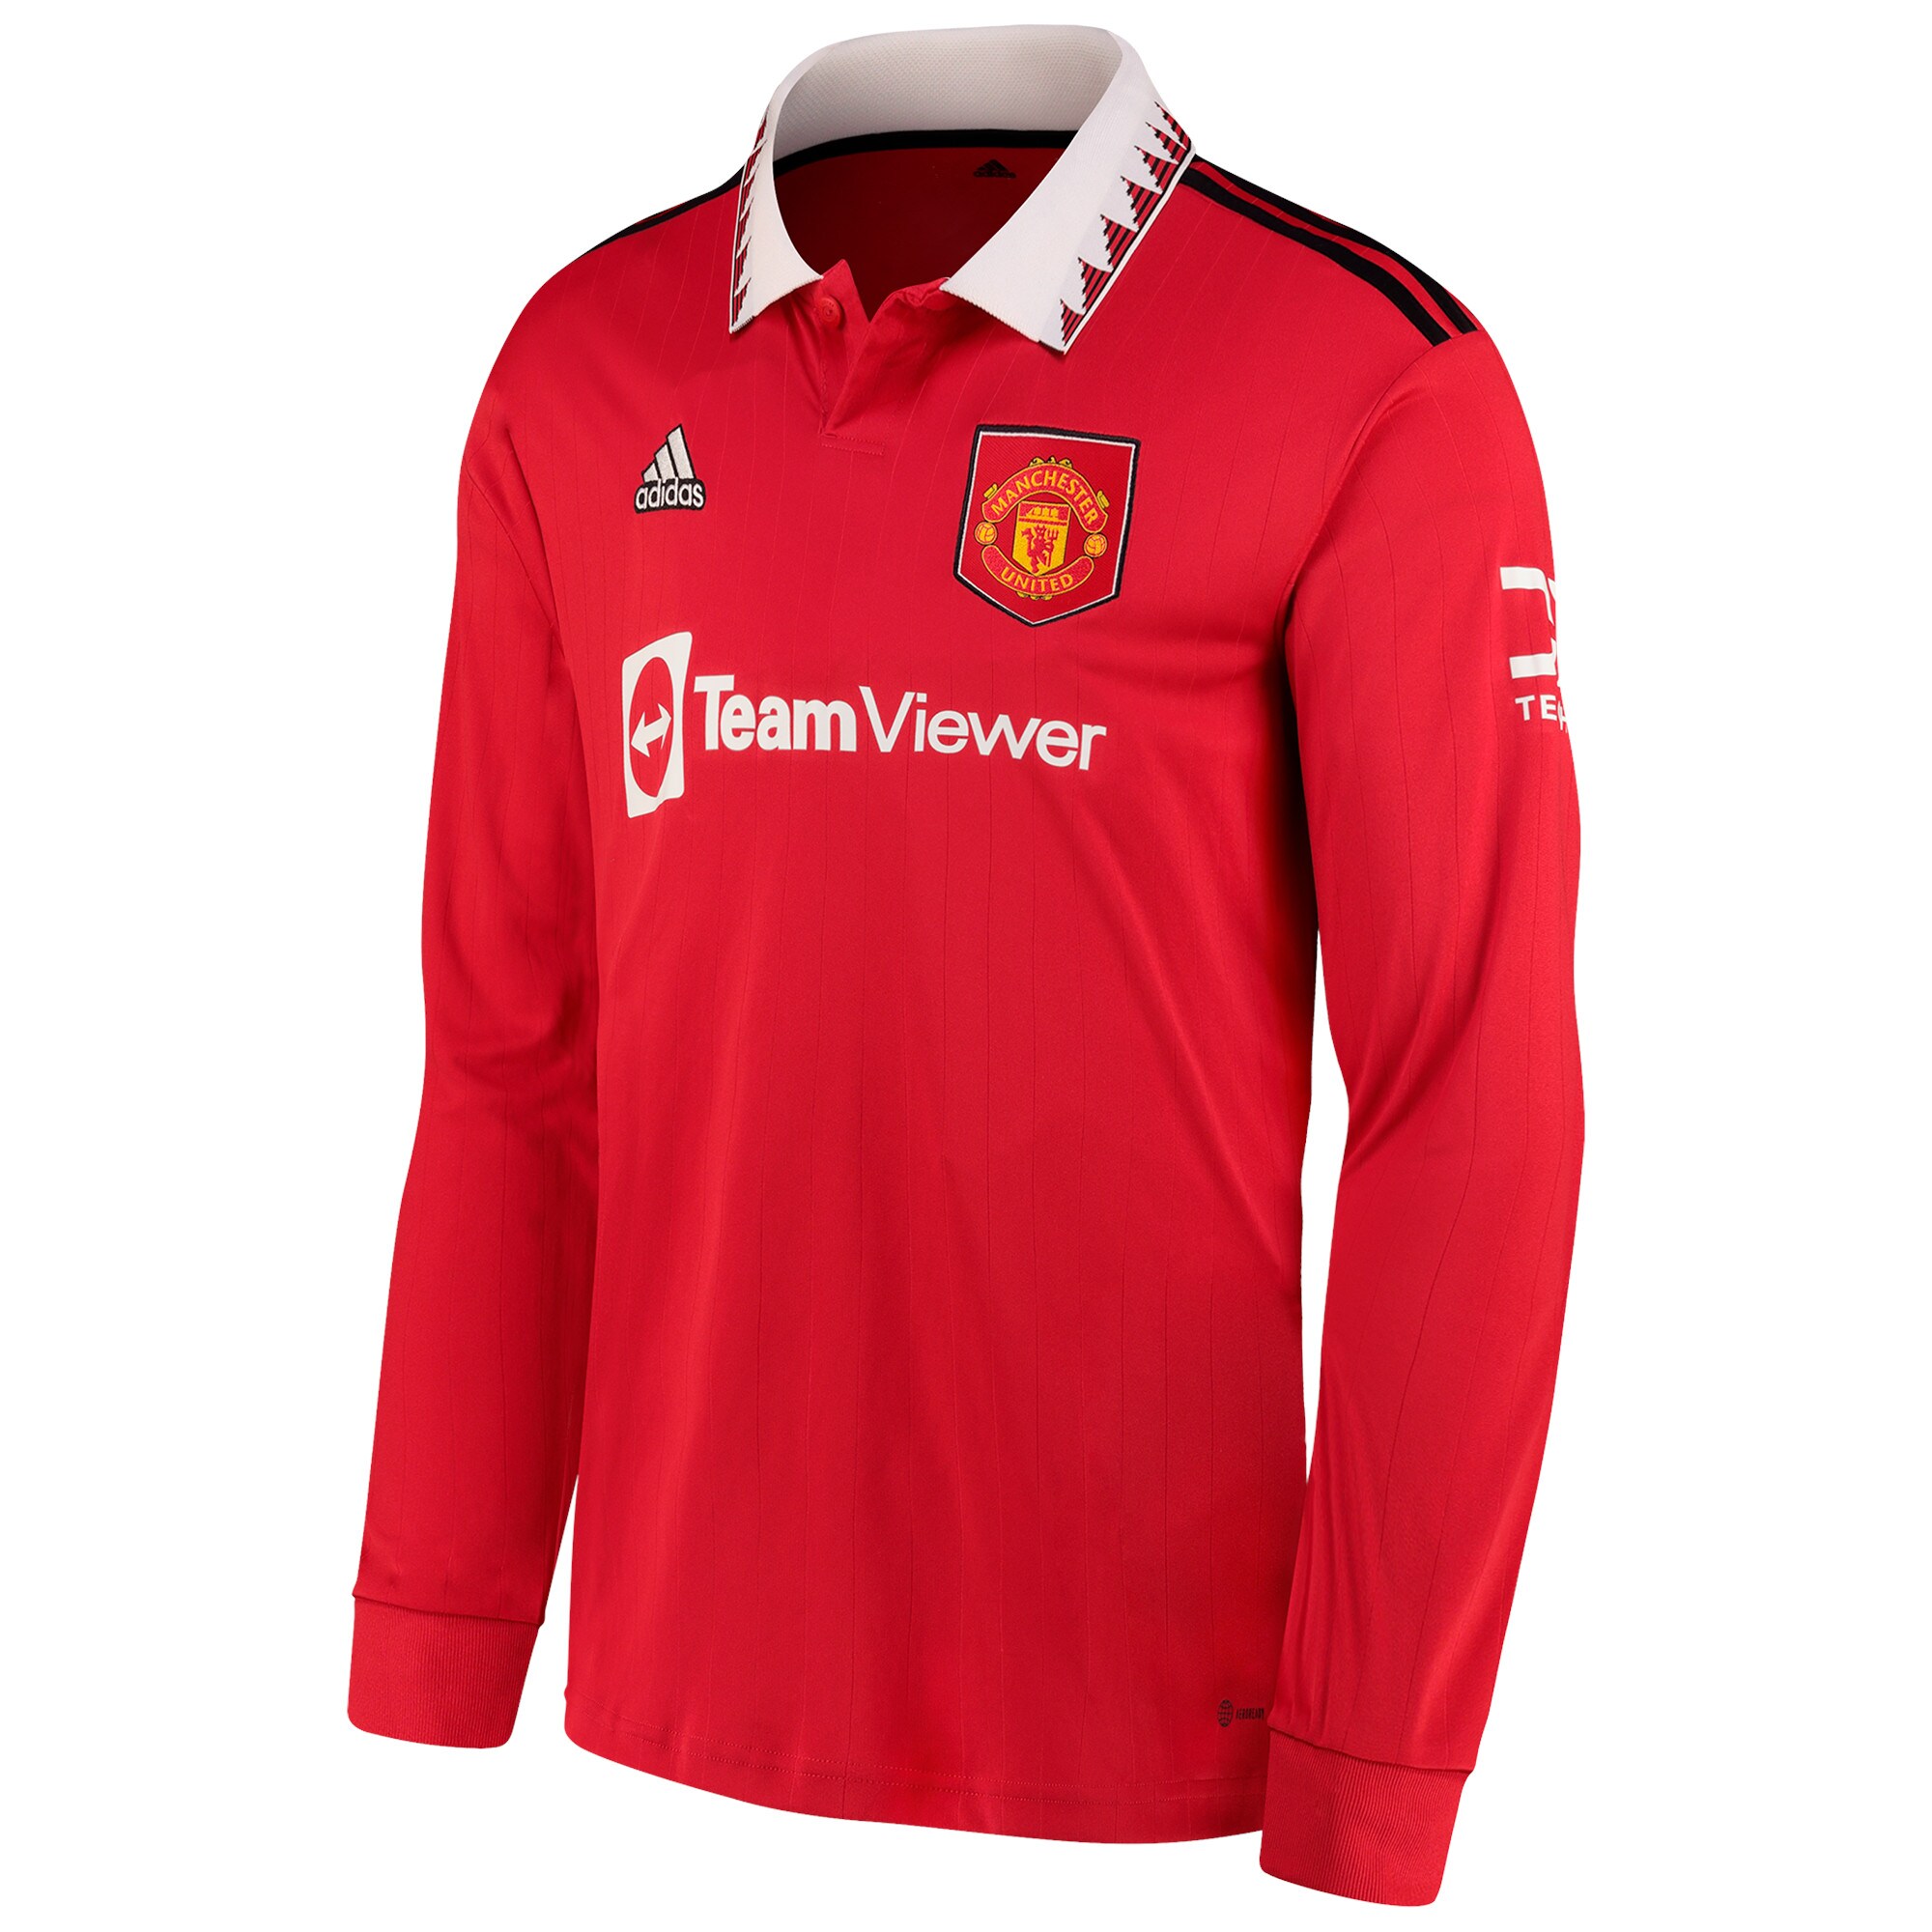 Manchester United Cup Home Shirt 2022-23 - Long Sleeve with Sabitzer 15 printing